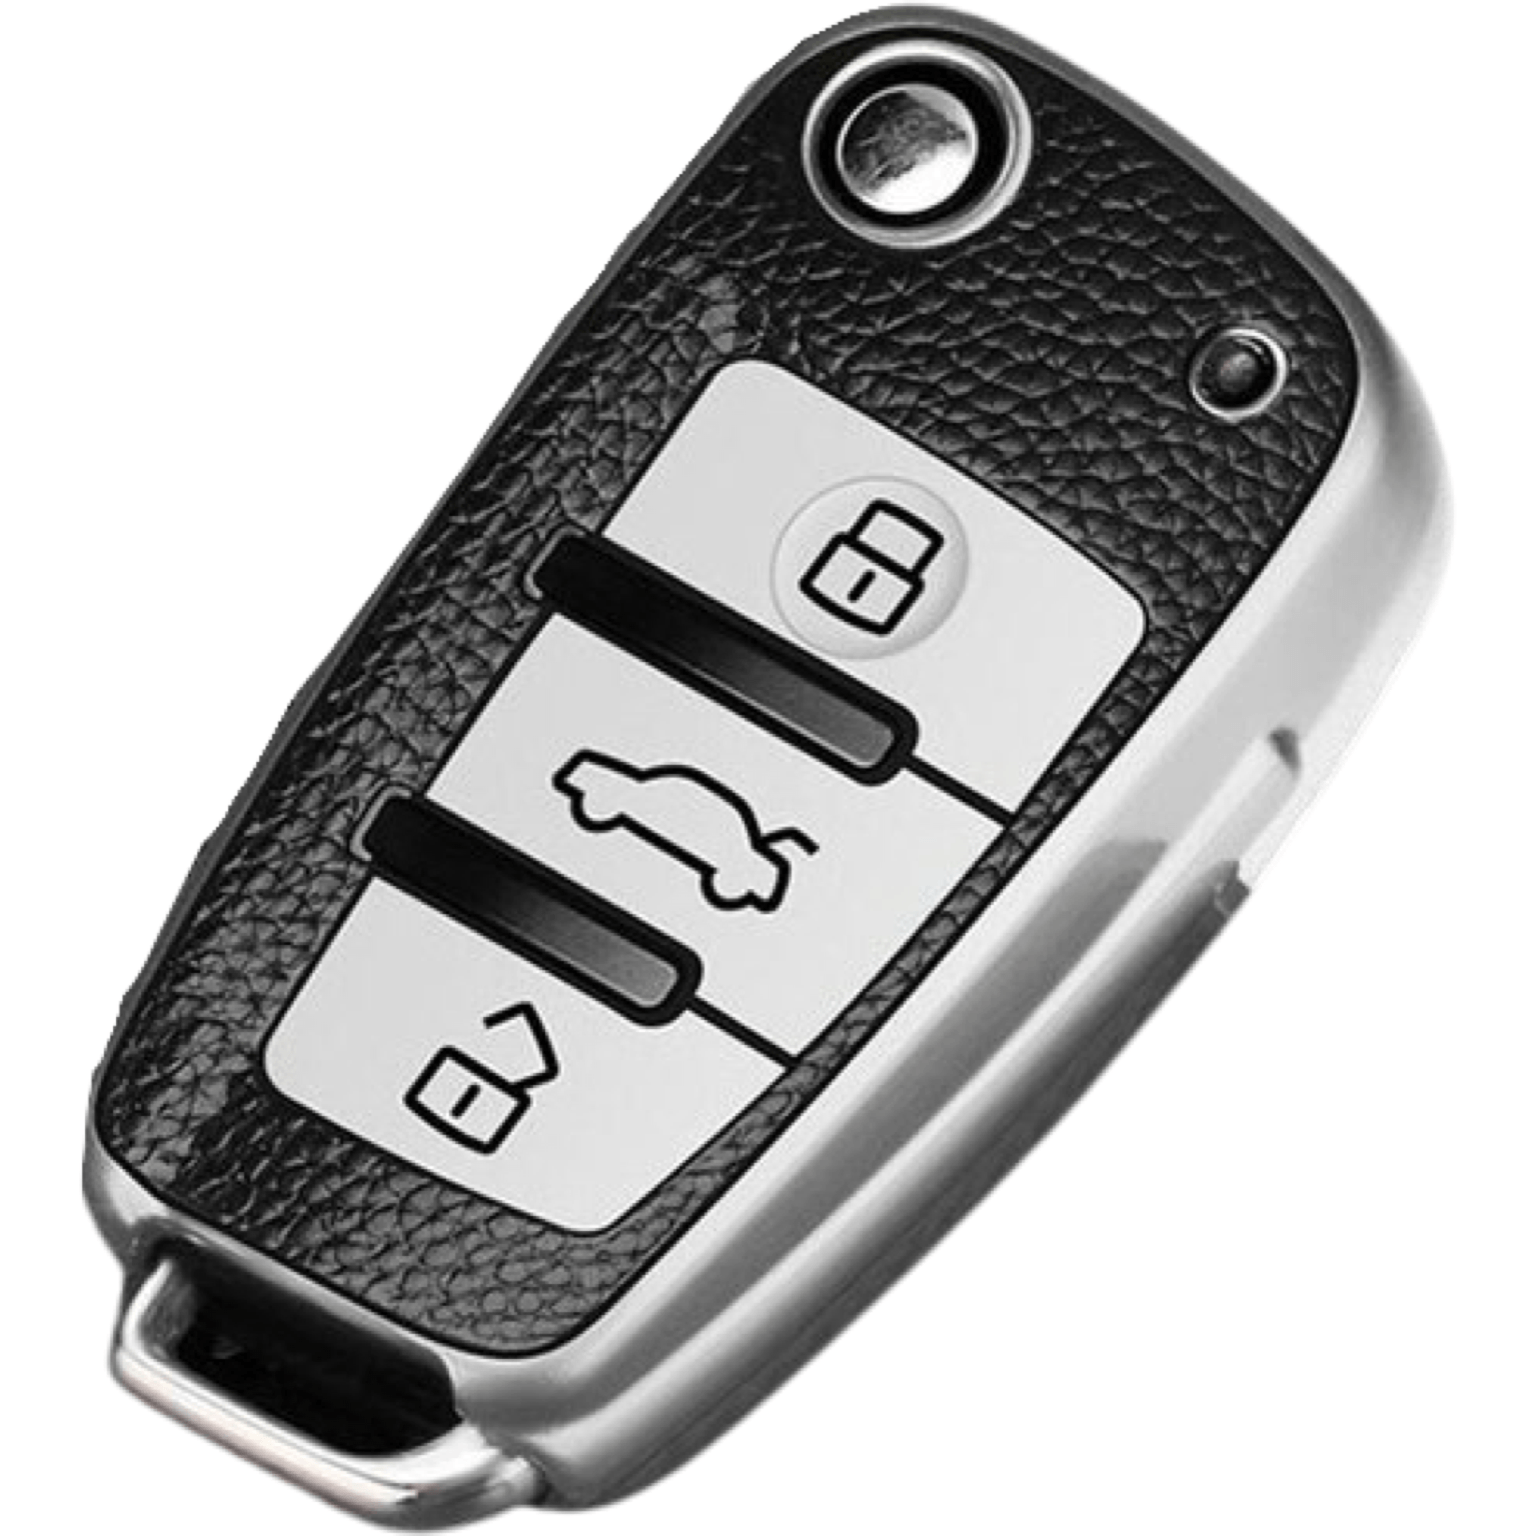 Audi key fob cover  - Black and silver leather | Keysleeves